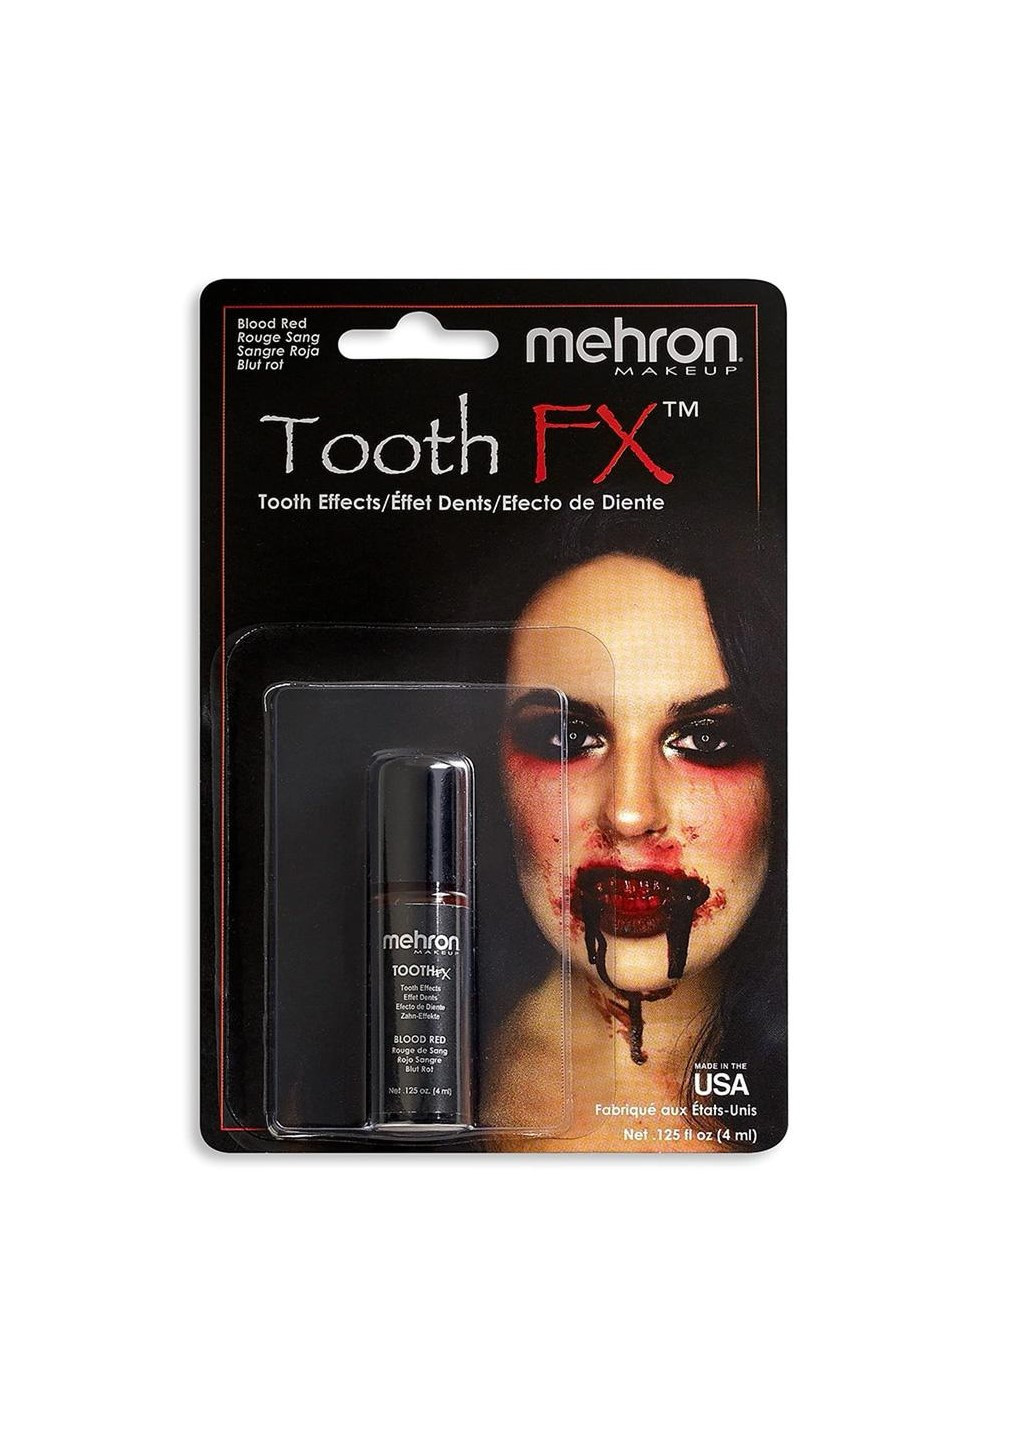 Medium tfx r Фарба для зубів Tooth FX with Brush for Special Effects - Blood Red (Кров), 4 мл Mehron (205593316)